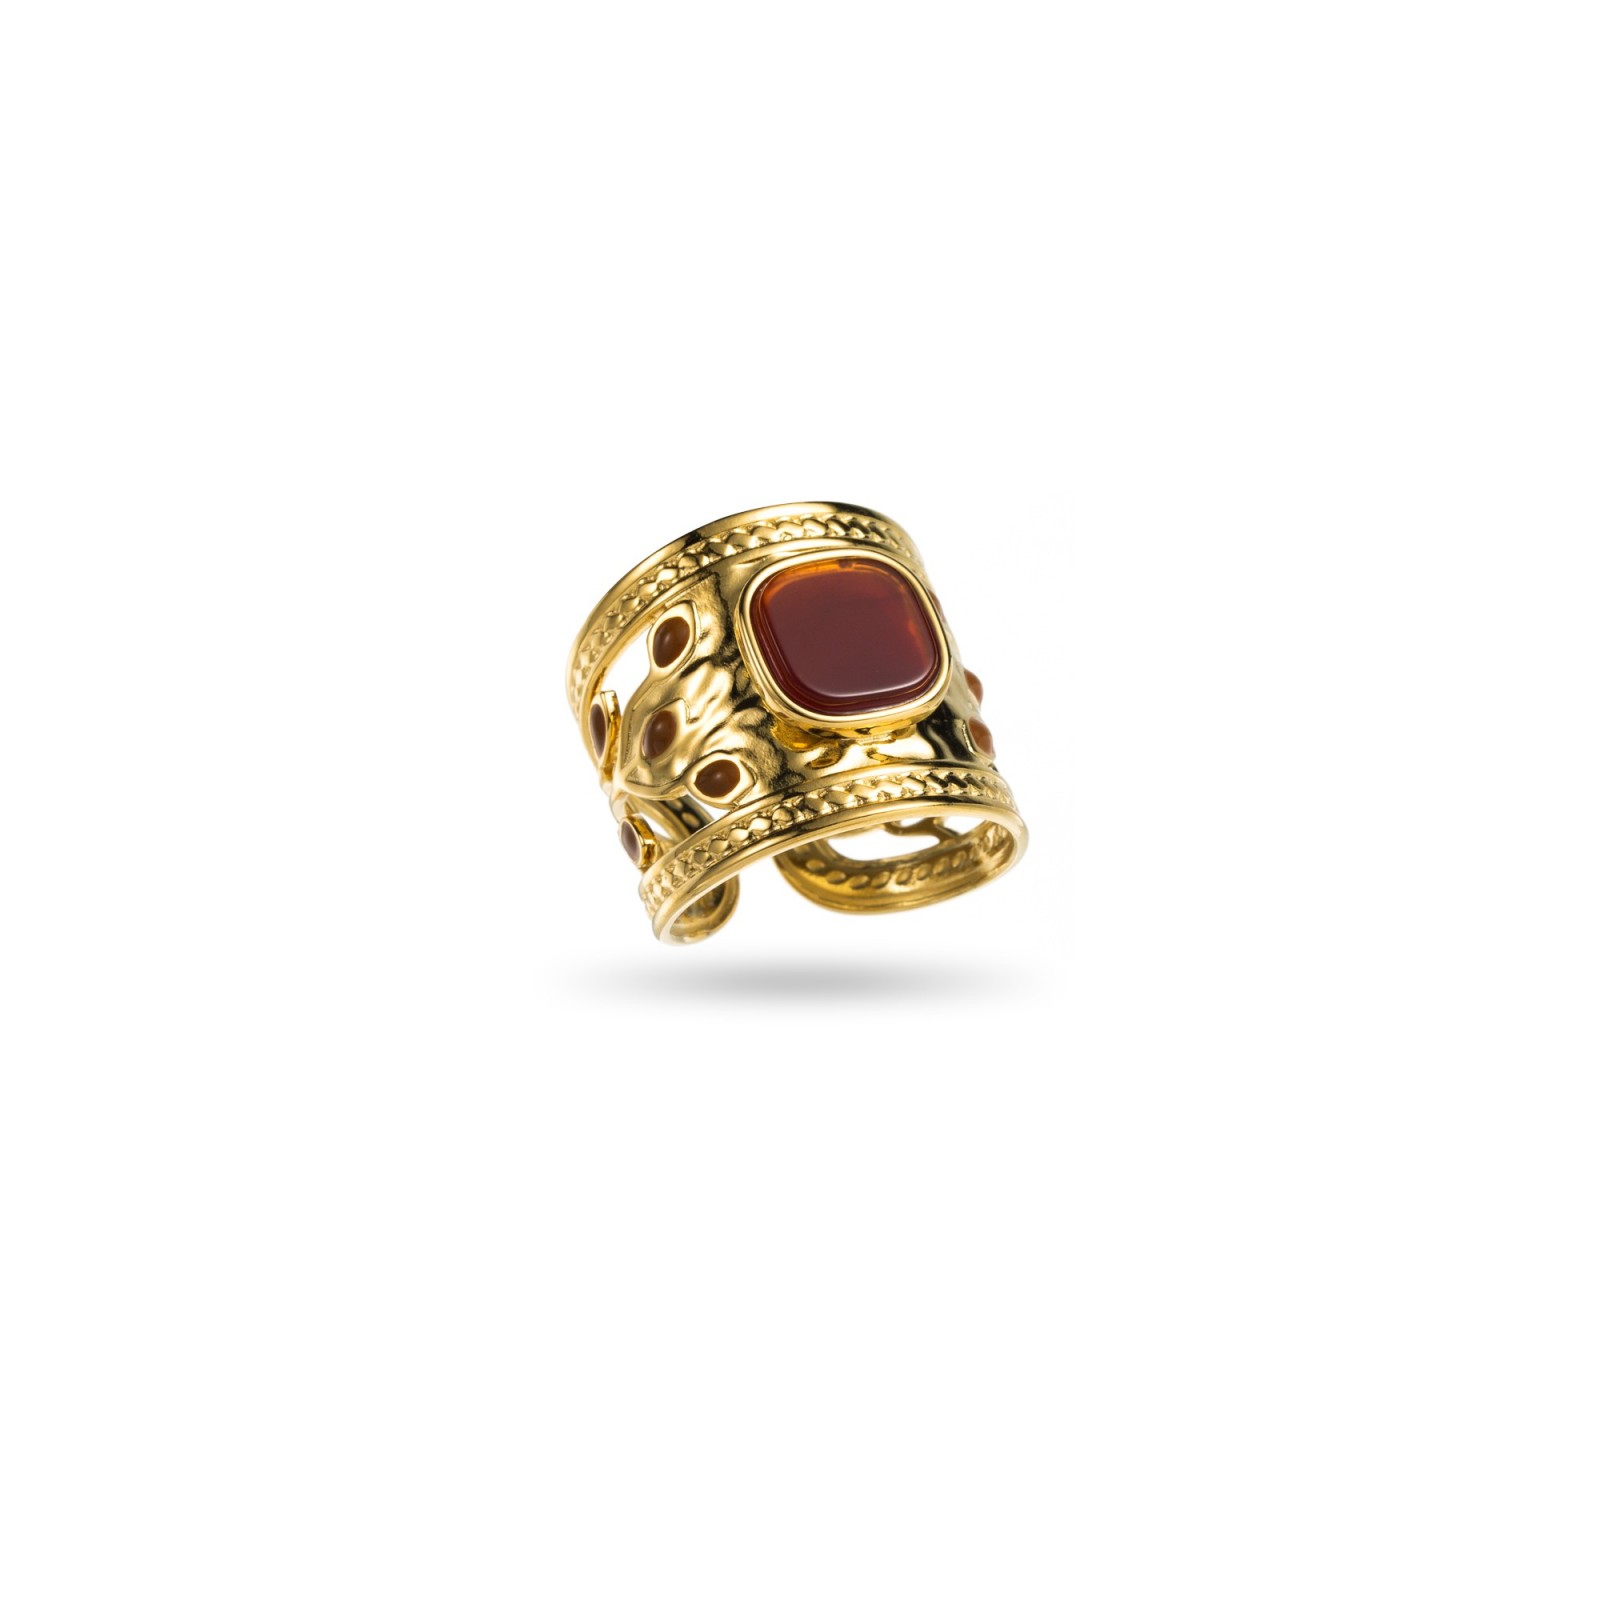 Large Stone Ring with Colored Foliage Stone:Carnelian